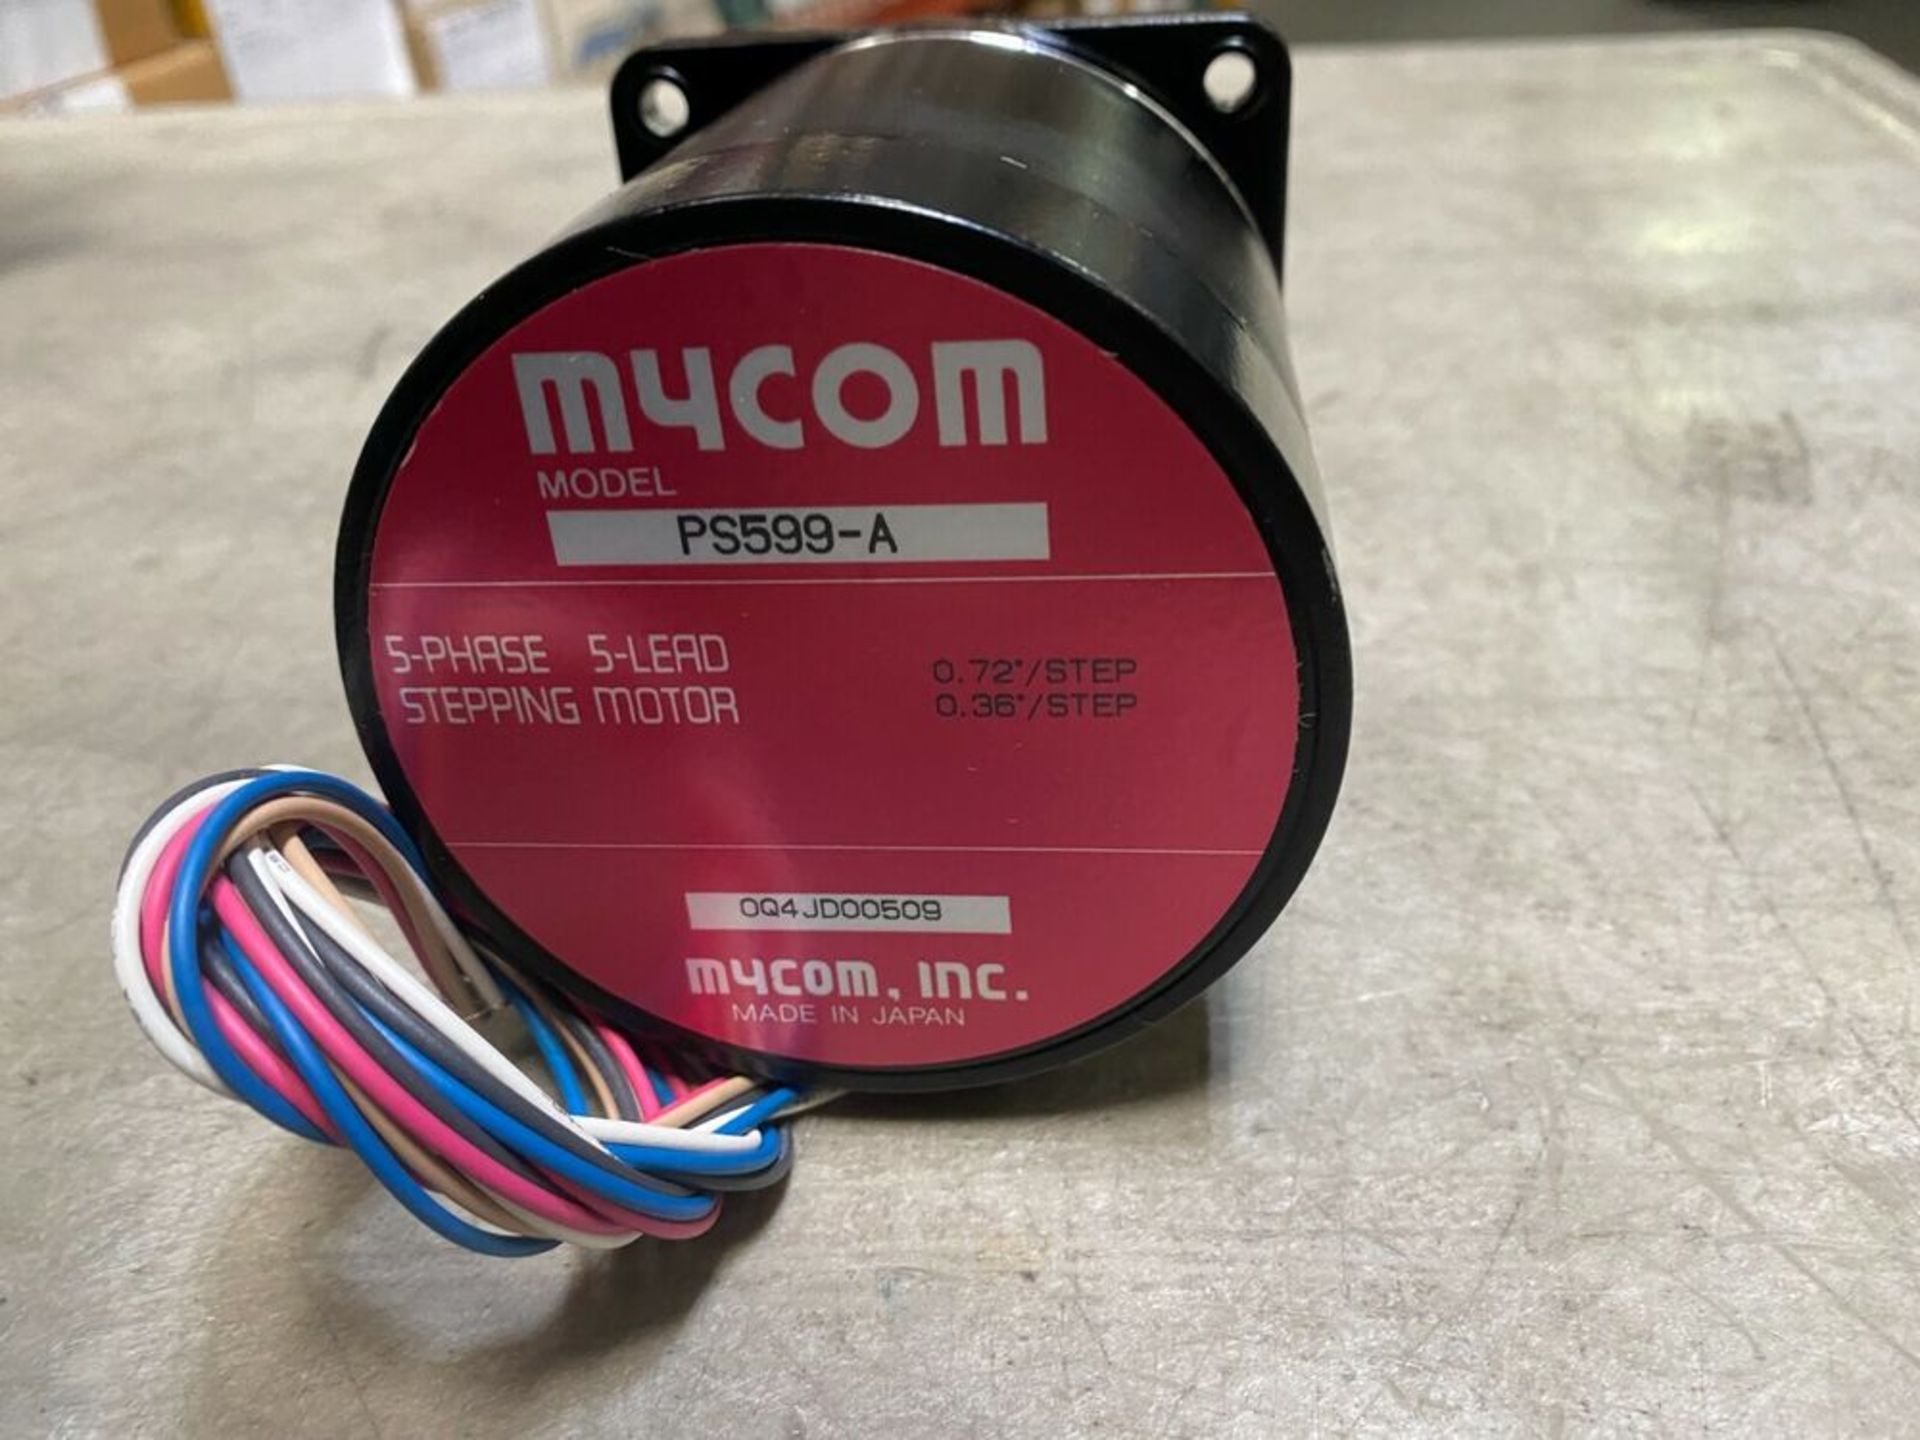 Mycom Nyden PS599-A 5-Phase 5-Lead Stepping Motor - Stepper Motors - Image 2 of 3